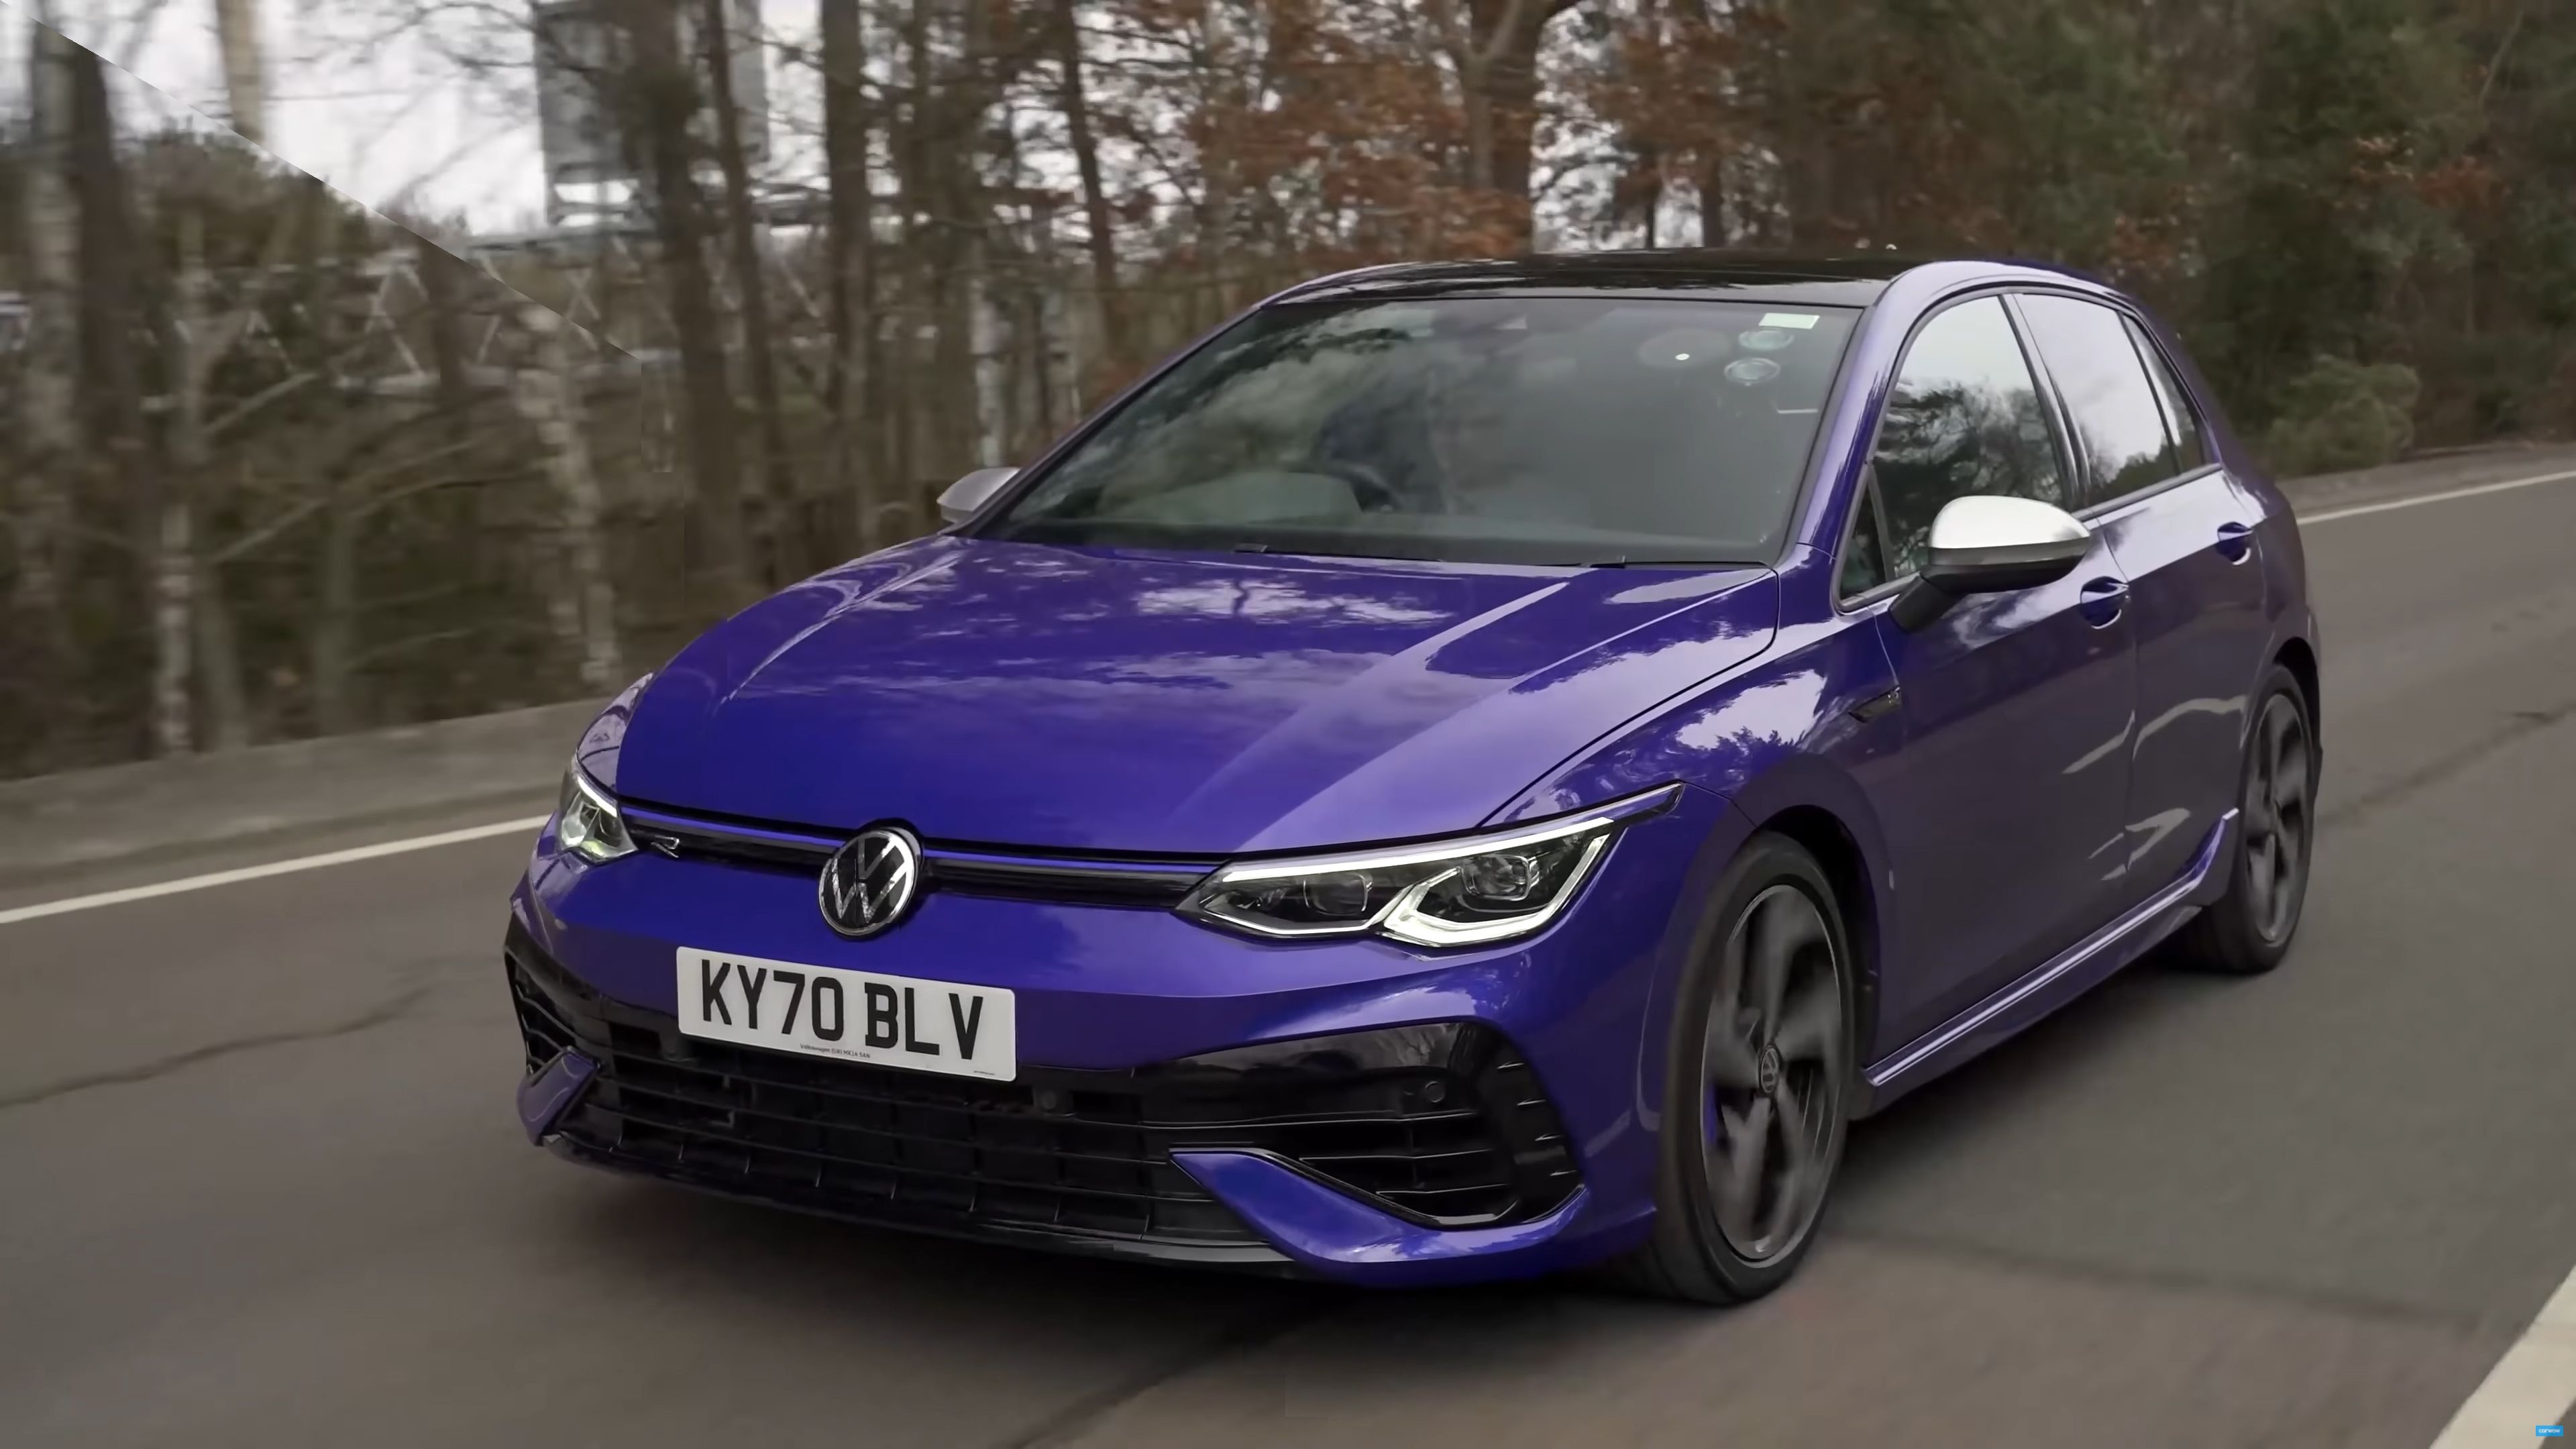 0-60 MPH In 4 Seconds? That's Seriously the 2021 Volkswagen Golf R